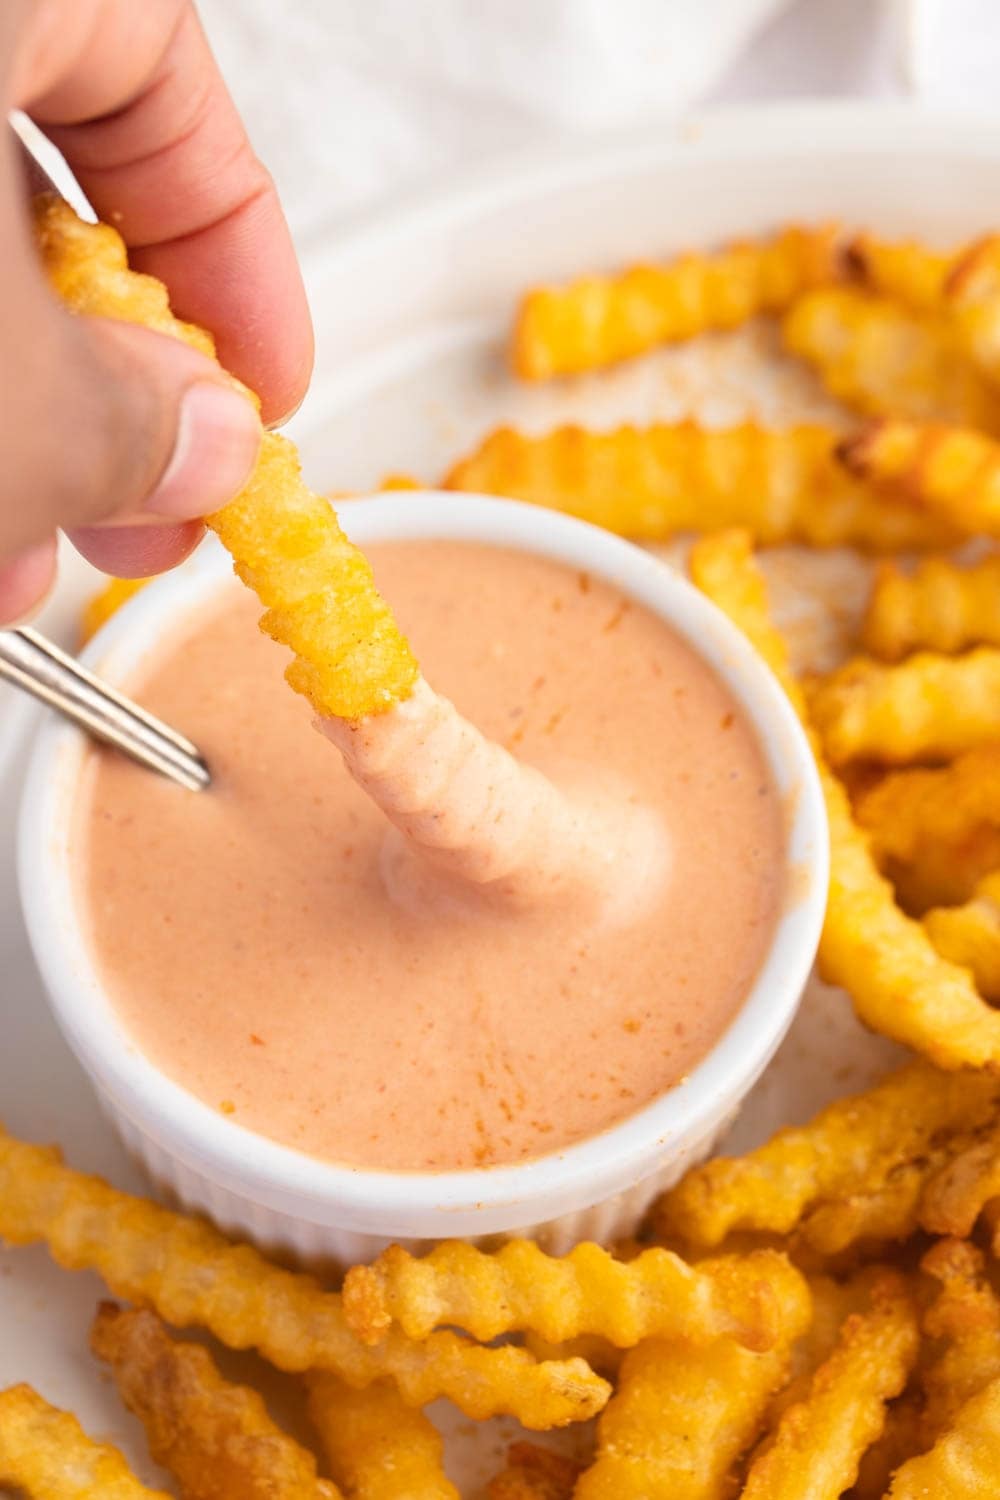 Dipping Fries in a Comeback Sauce